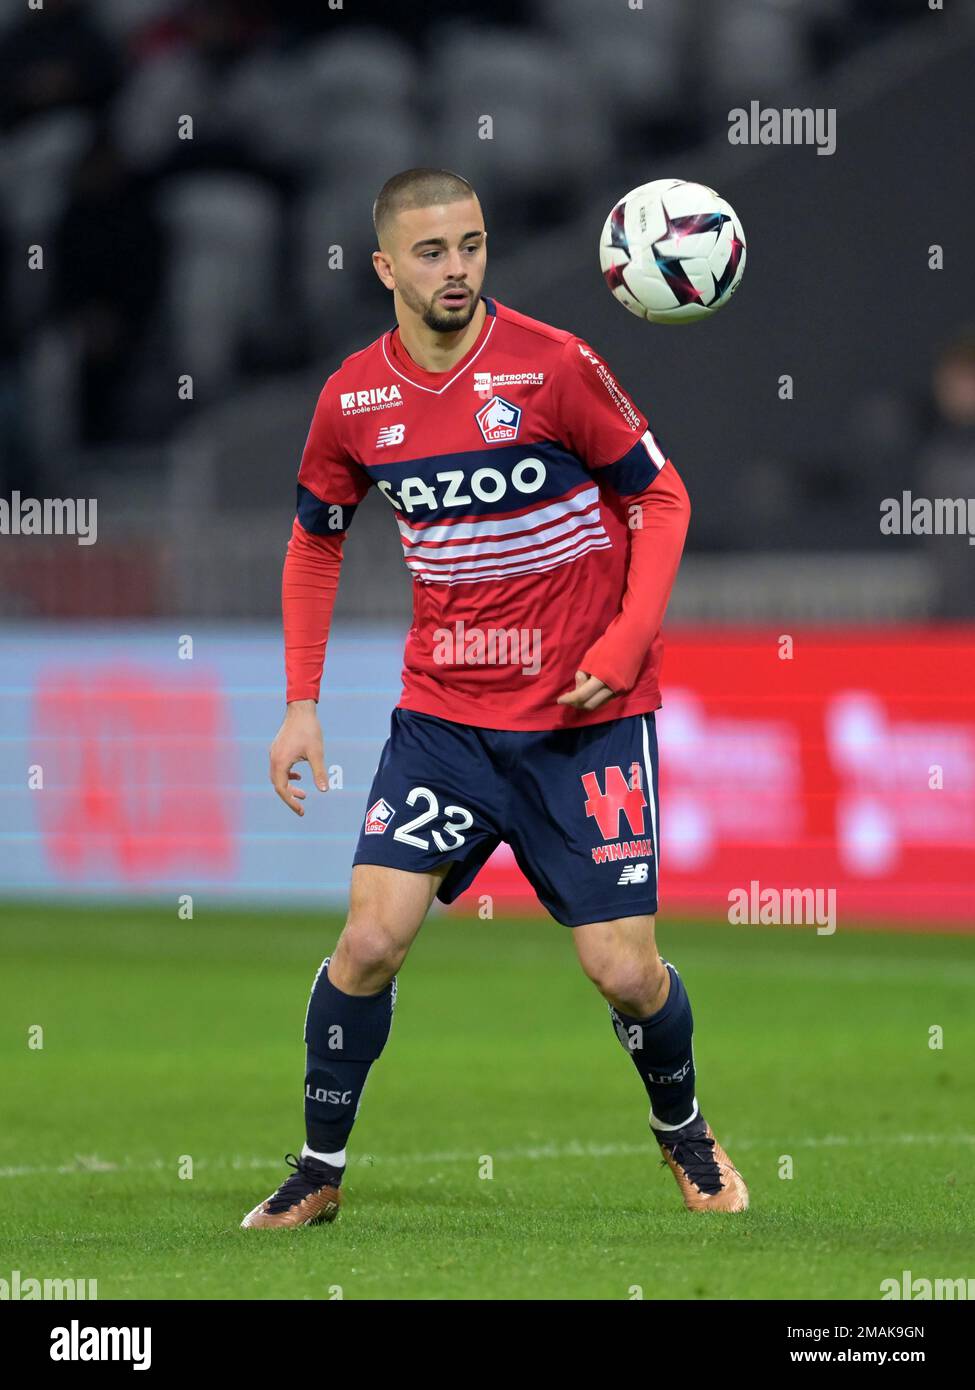 LILLE - Edon Zhegrova of LOSC Lille during the French Ligue 1 match between  Lille OSC and Estac Troyes AC at Pierre-Mauroy Stadium on January 15, 2023  in Lille, France. AP